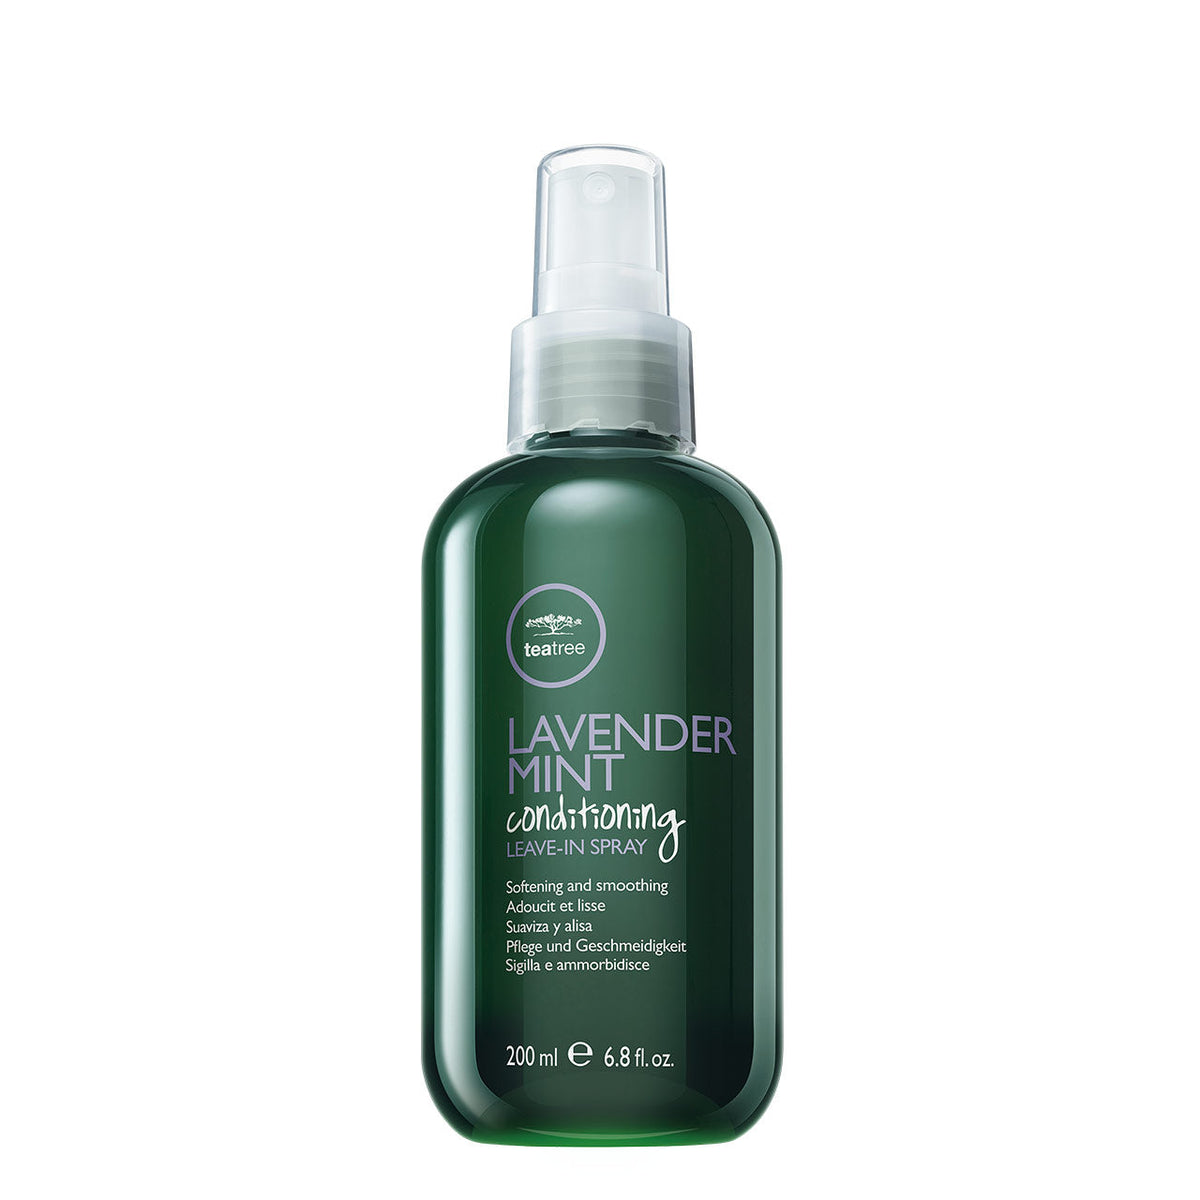 Tea Tree Lavender Mint Conditioning Leave-In Spray - 200ML - by Paul Mitchell |ProCare Outlet|